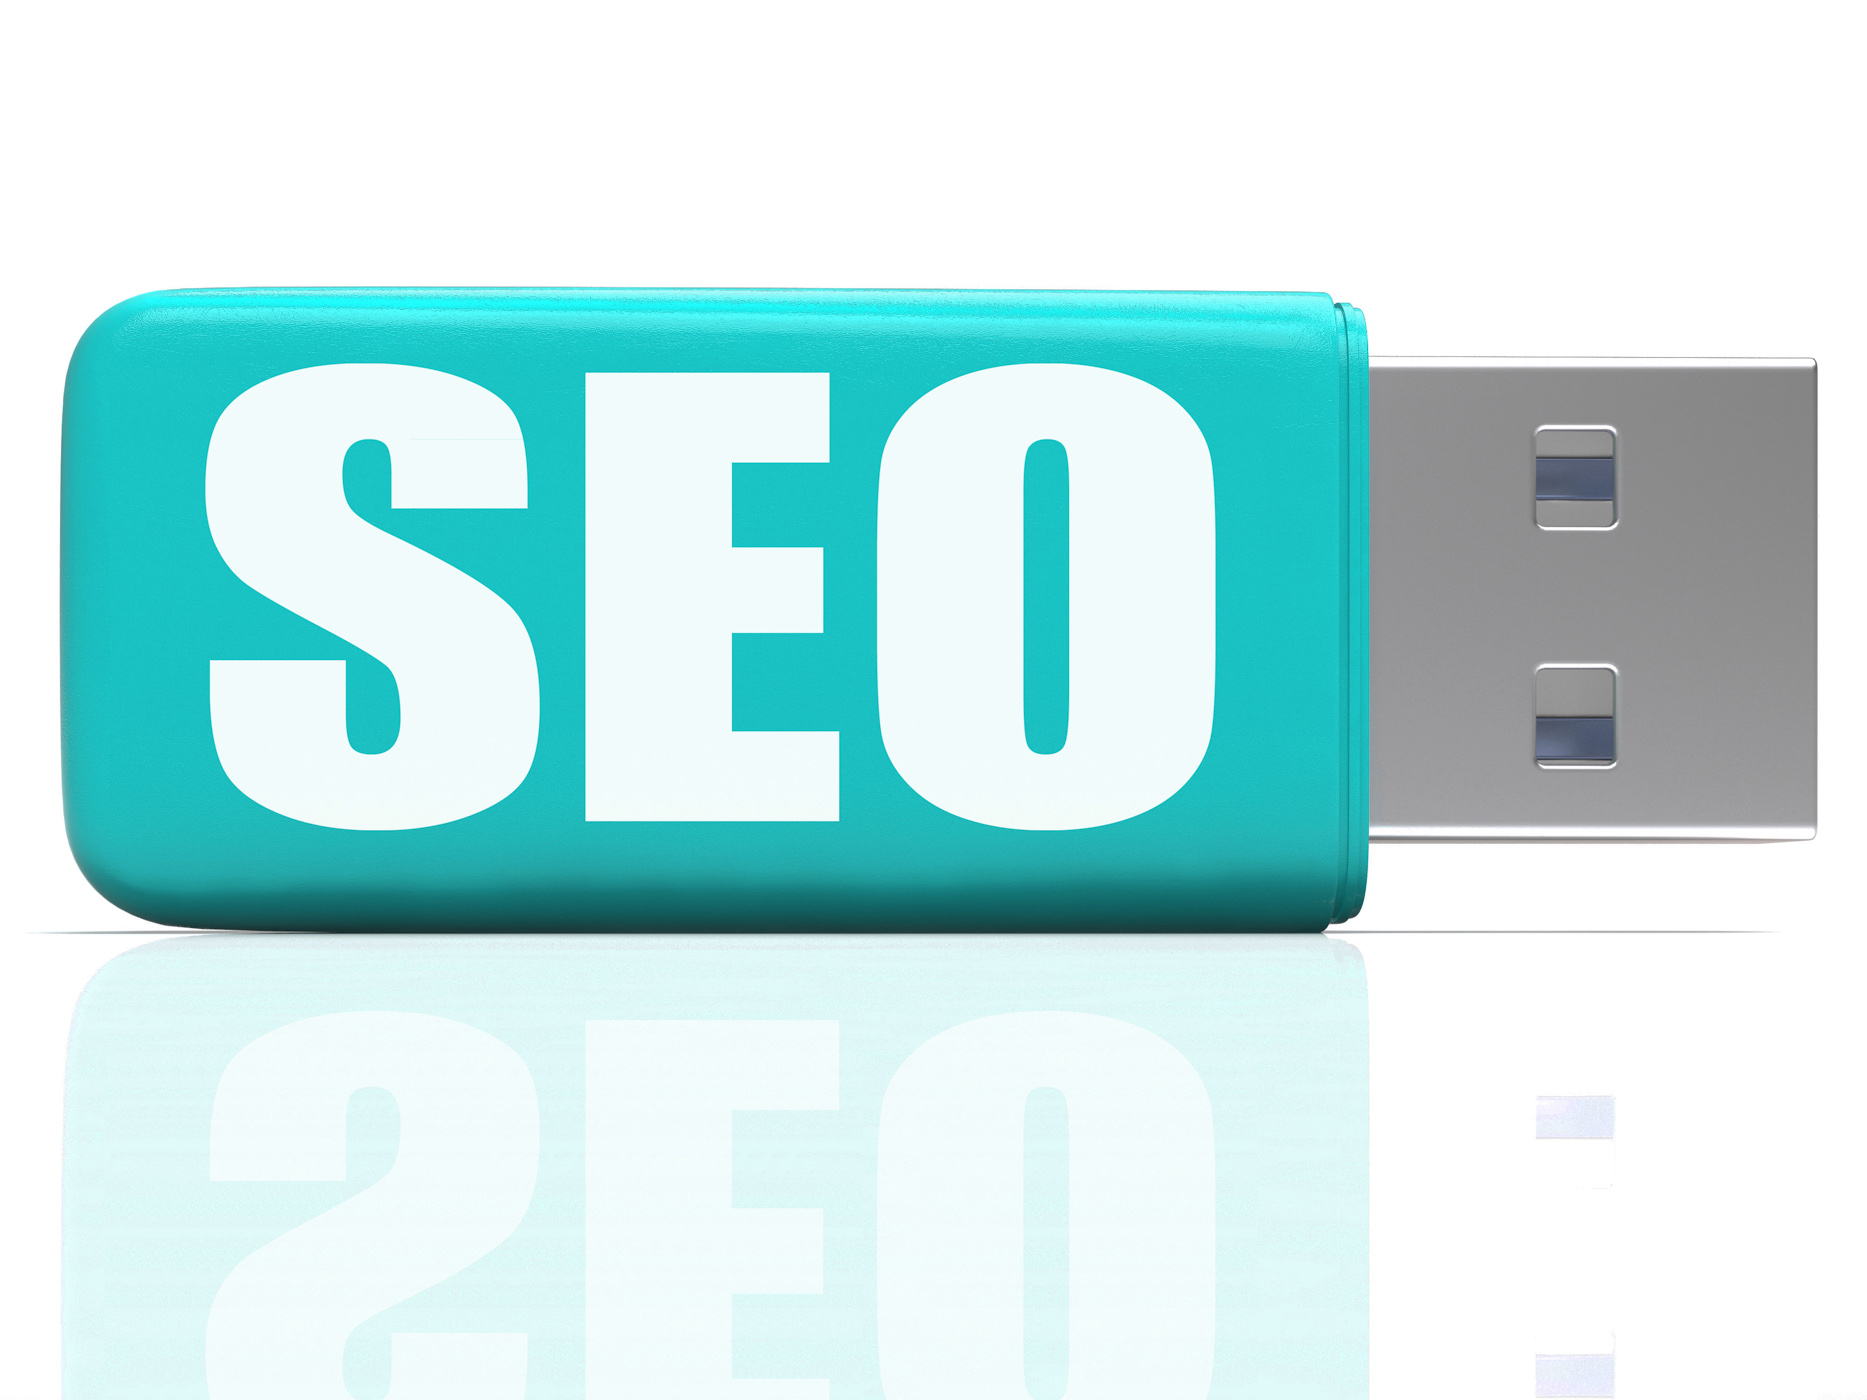 Seo pen drive means online search and development photo